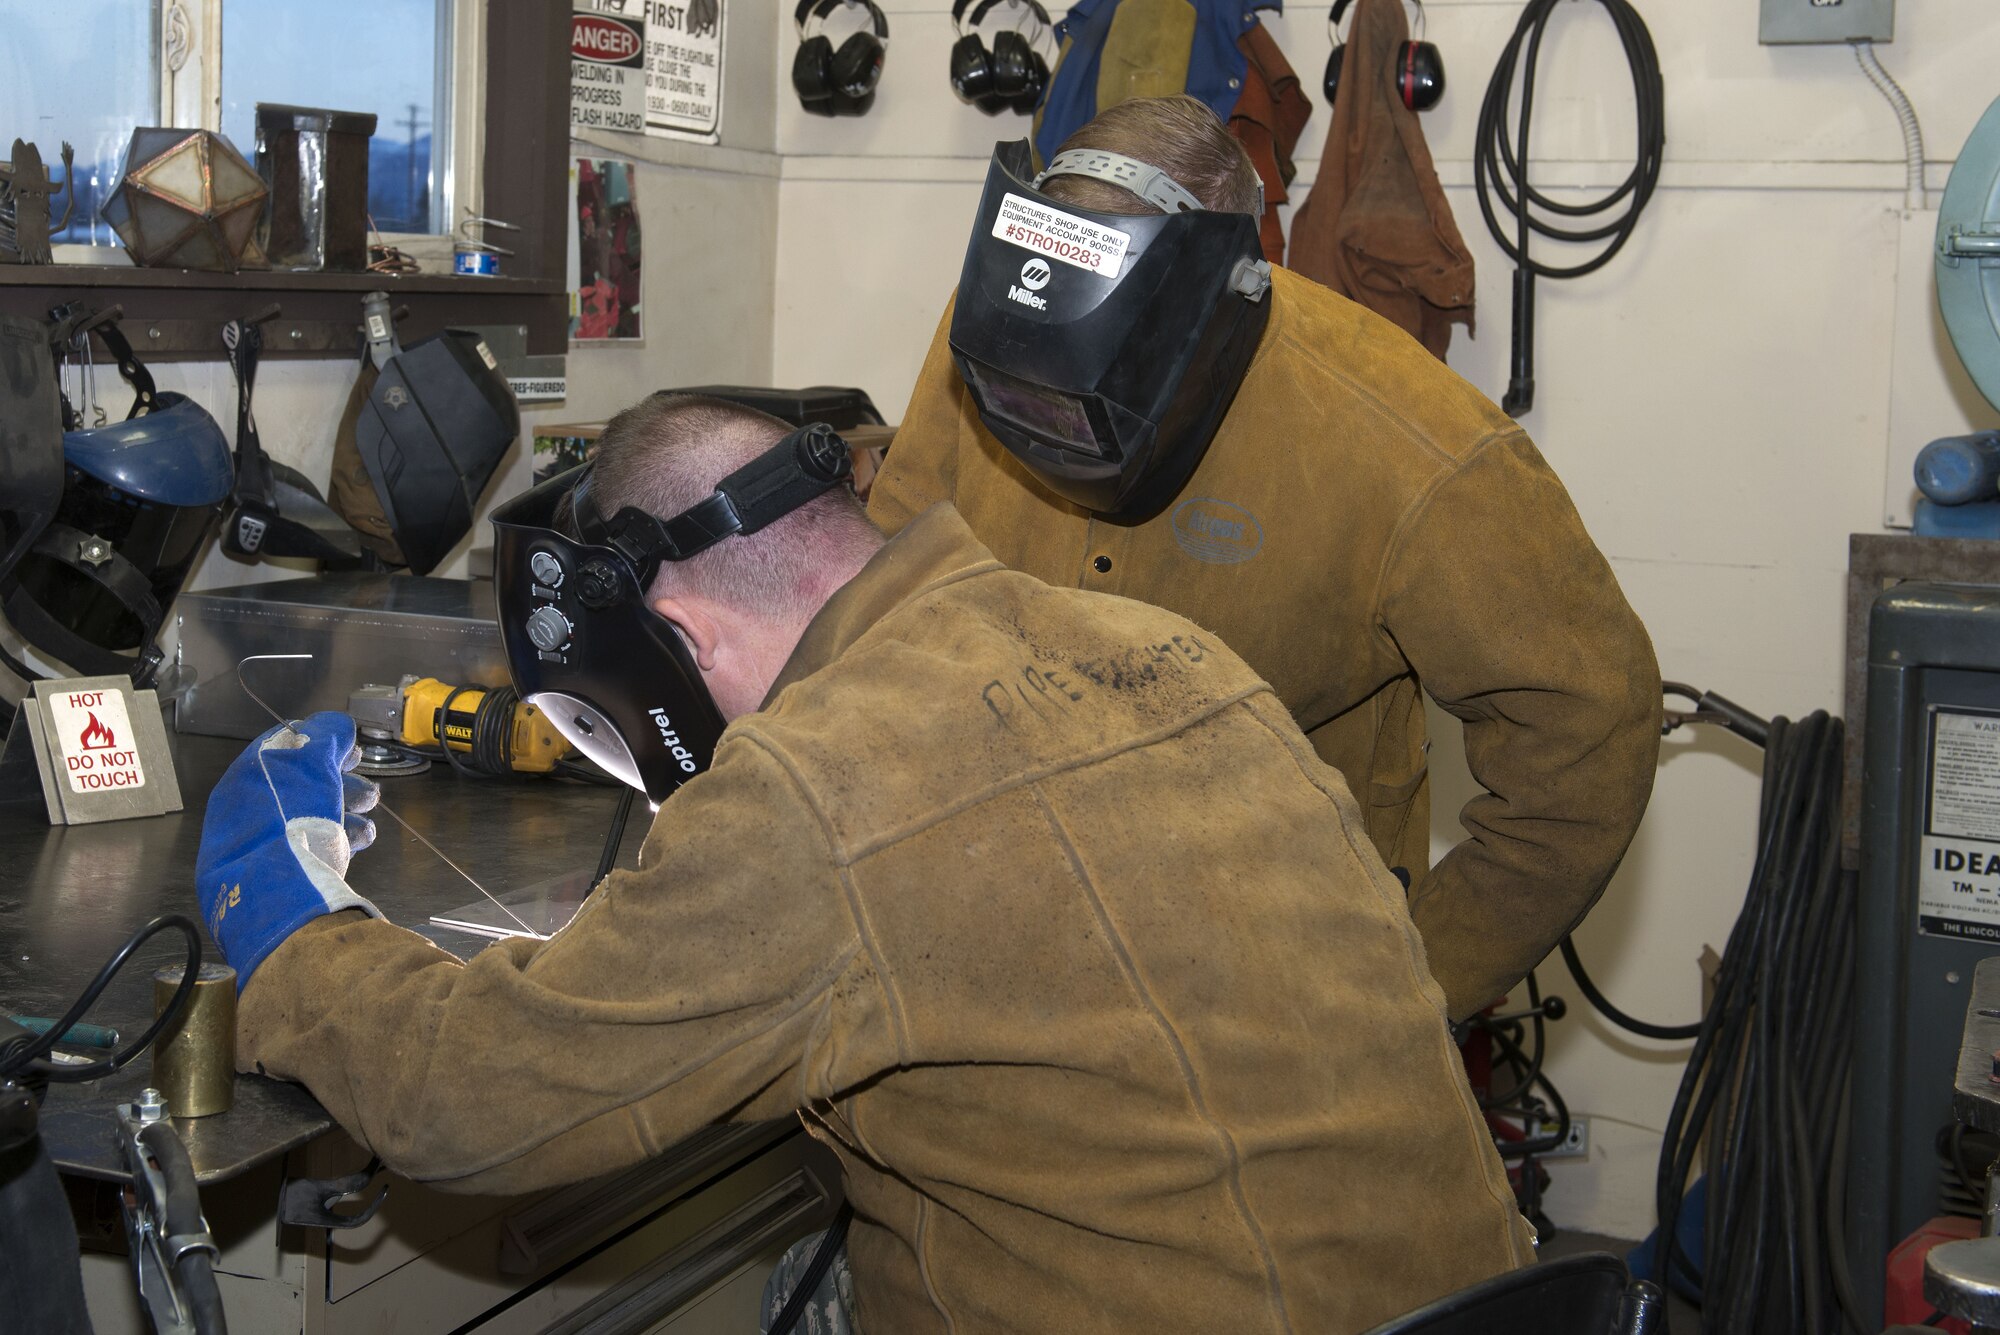 Air Force Staff Sgt. Levi Smelser and Airman 1st Class Taylor Zehr, both 773d Civil Engineer Squadron Airmen, practice welding on scrap metal at the construction shop on Joint Base Elmendorf-Richardson, Alaska. The construction shop repairs and performs maintenance on doors, windows, framing, airfield damage and much more.